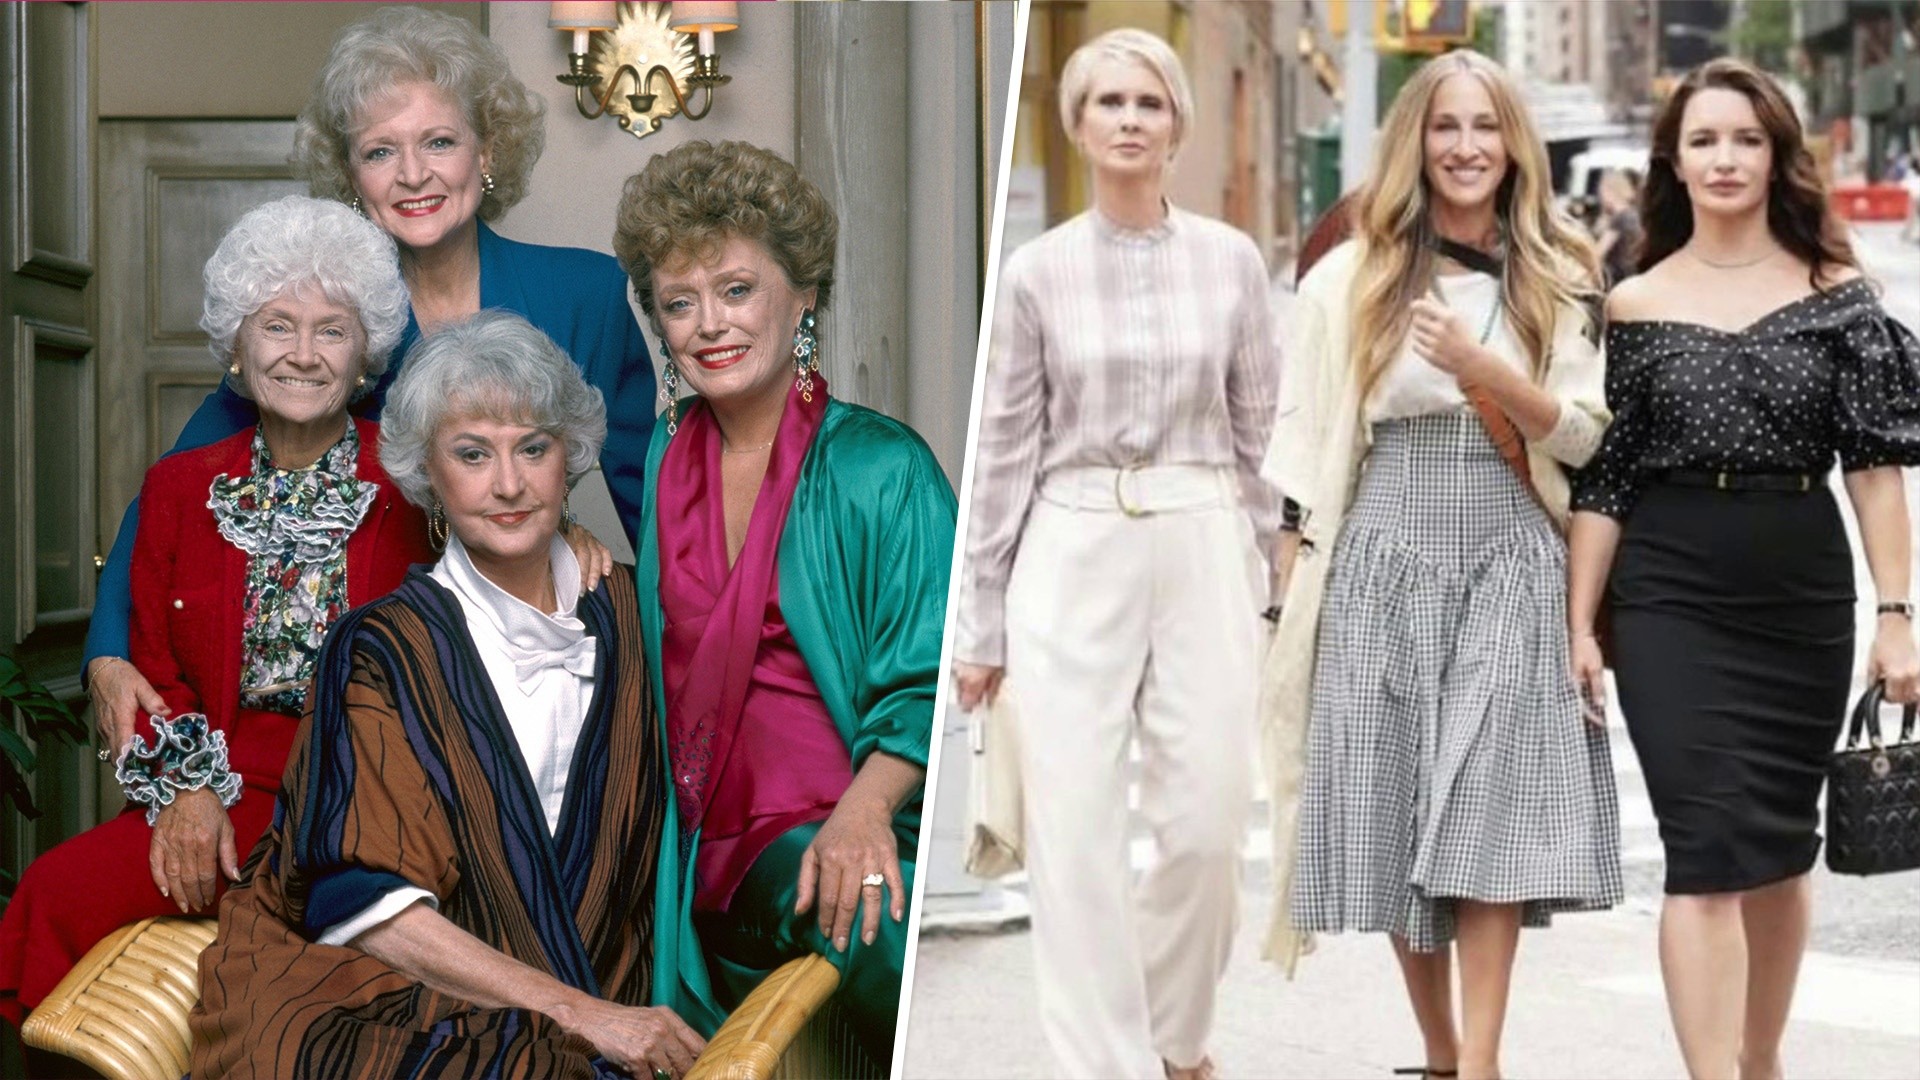 Fans shocked to learn Golden Girls are same age as cast of SATC reboot photo